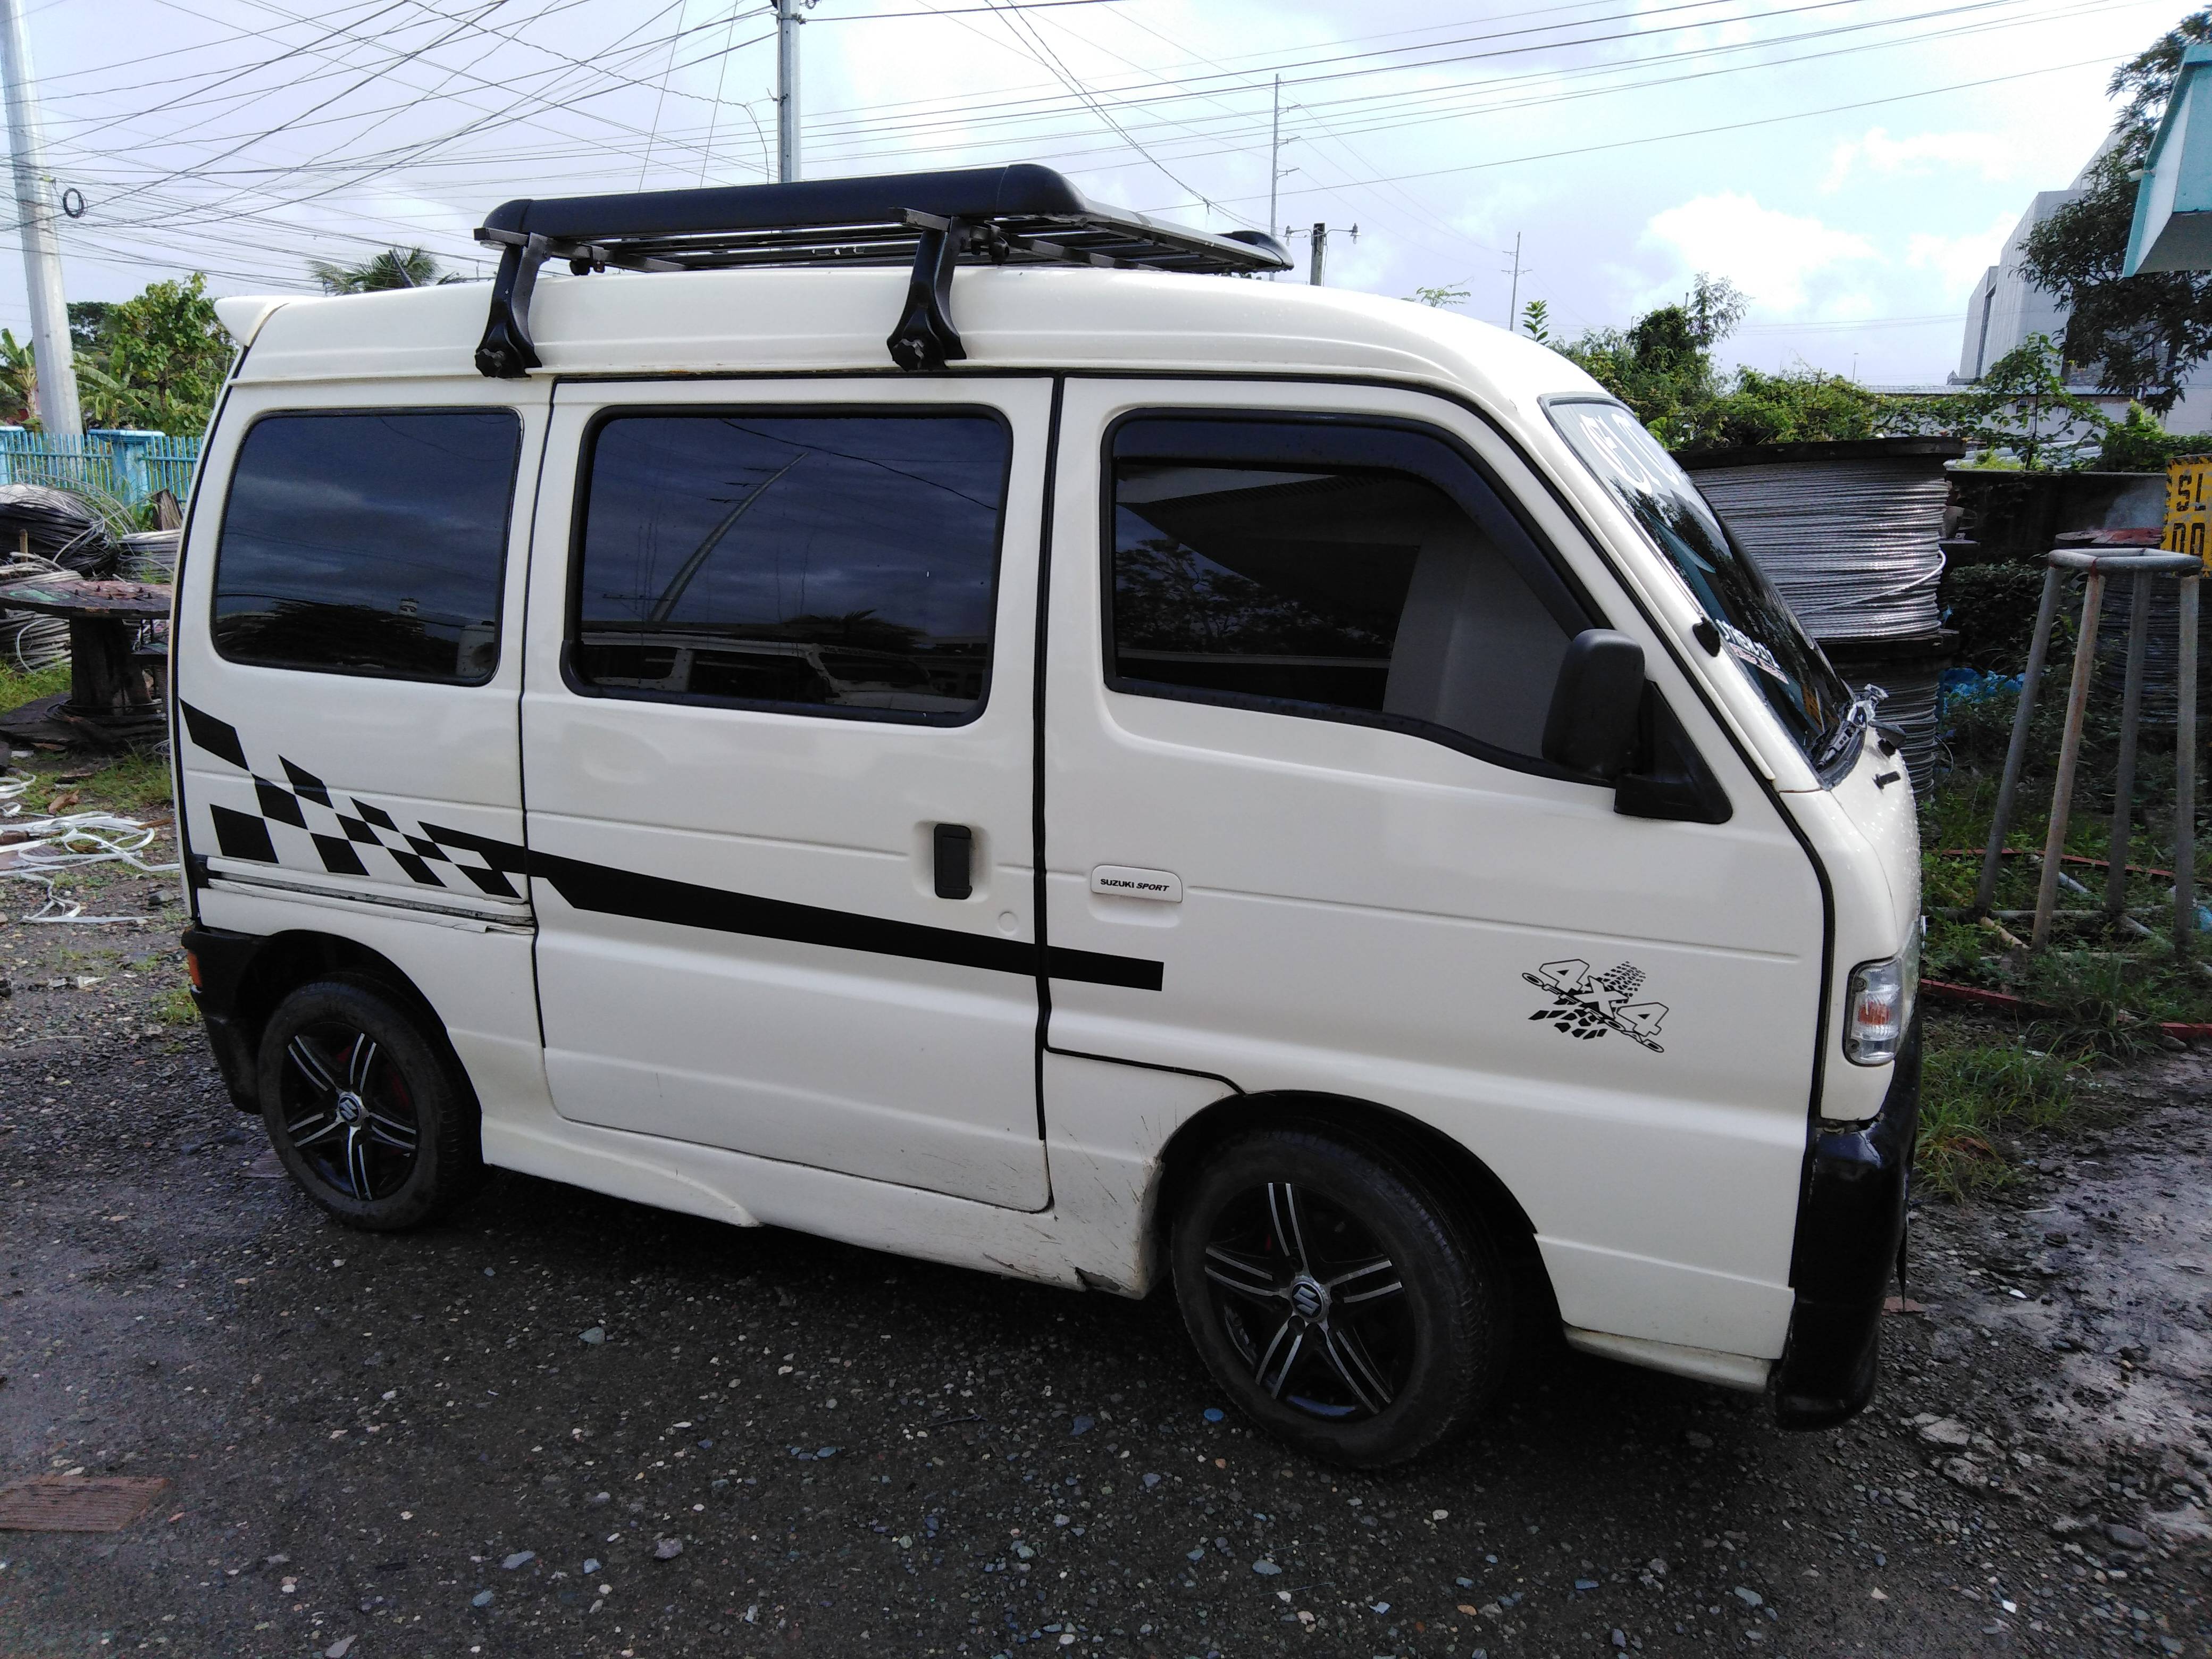 Used 2010 Suzuki Carry Cab and Chasis 1.5L